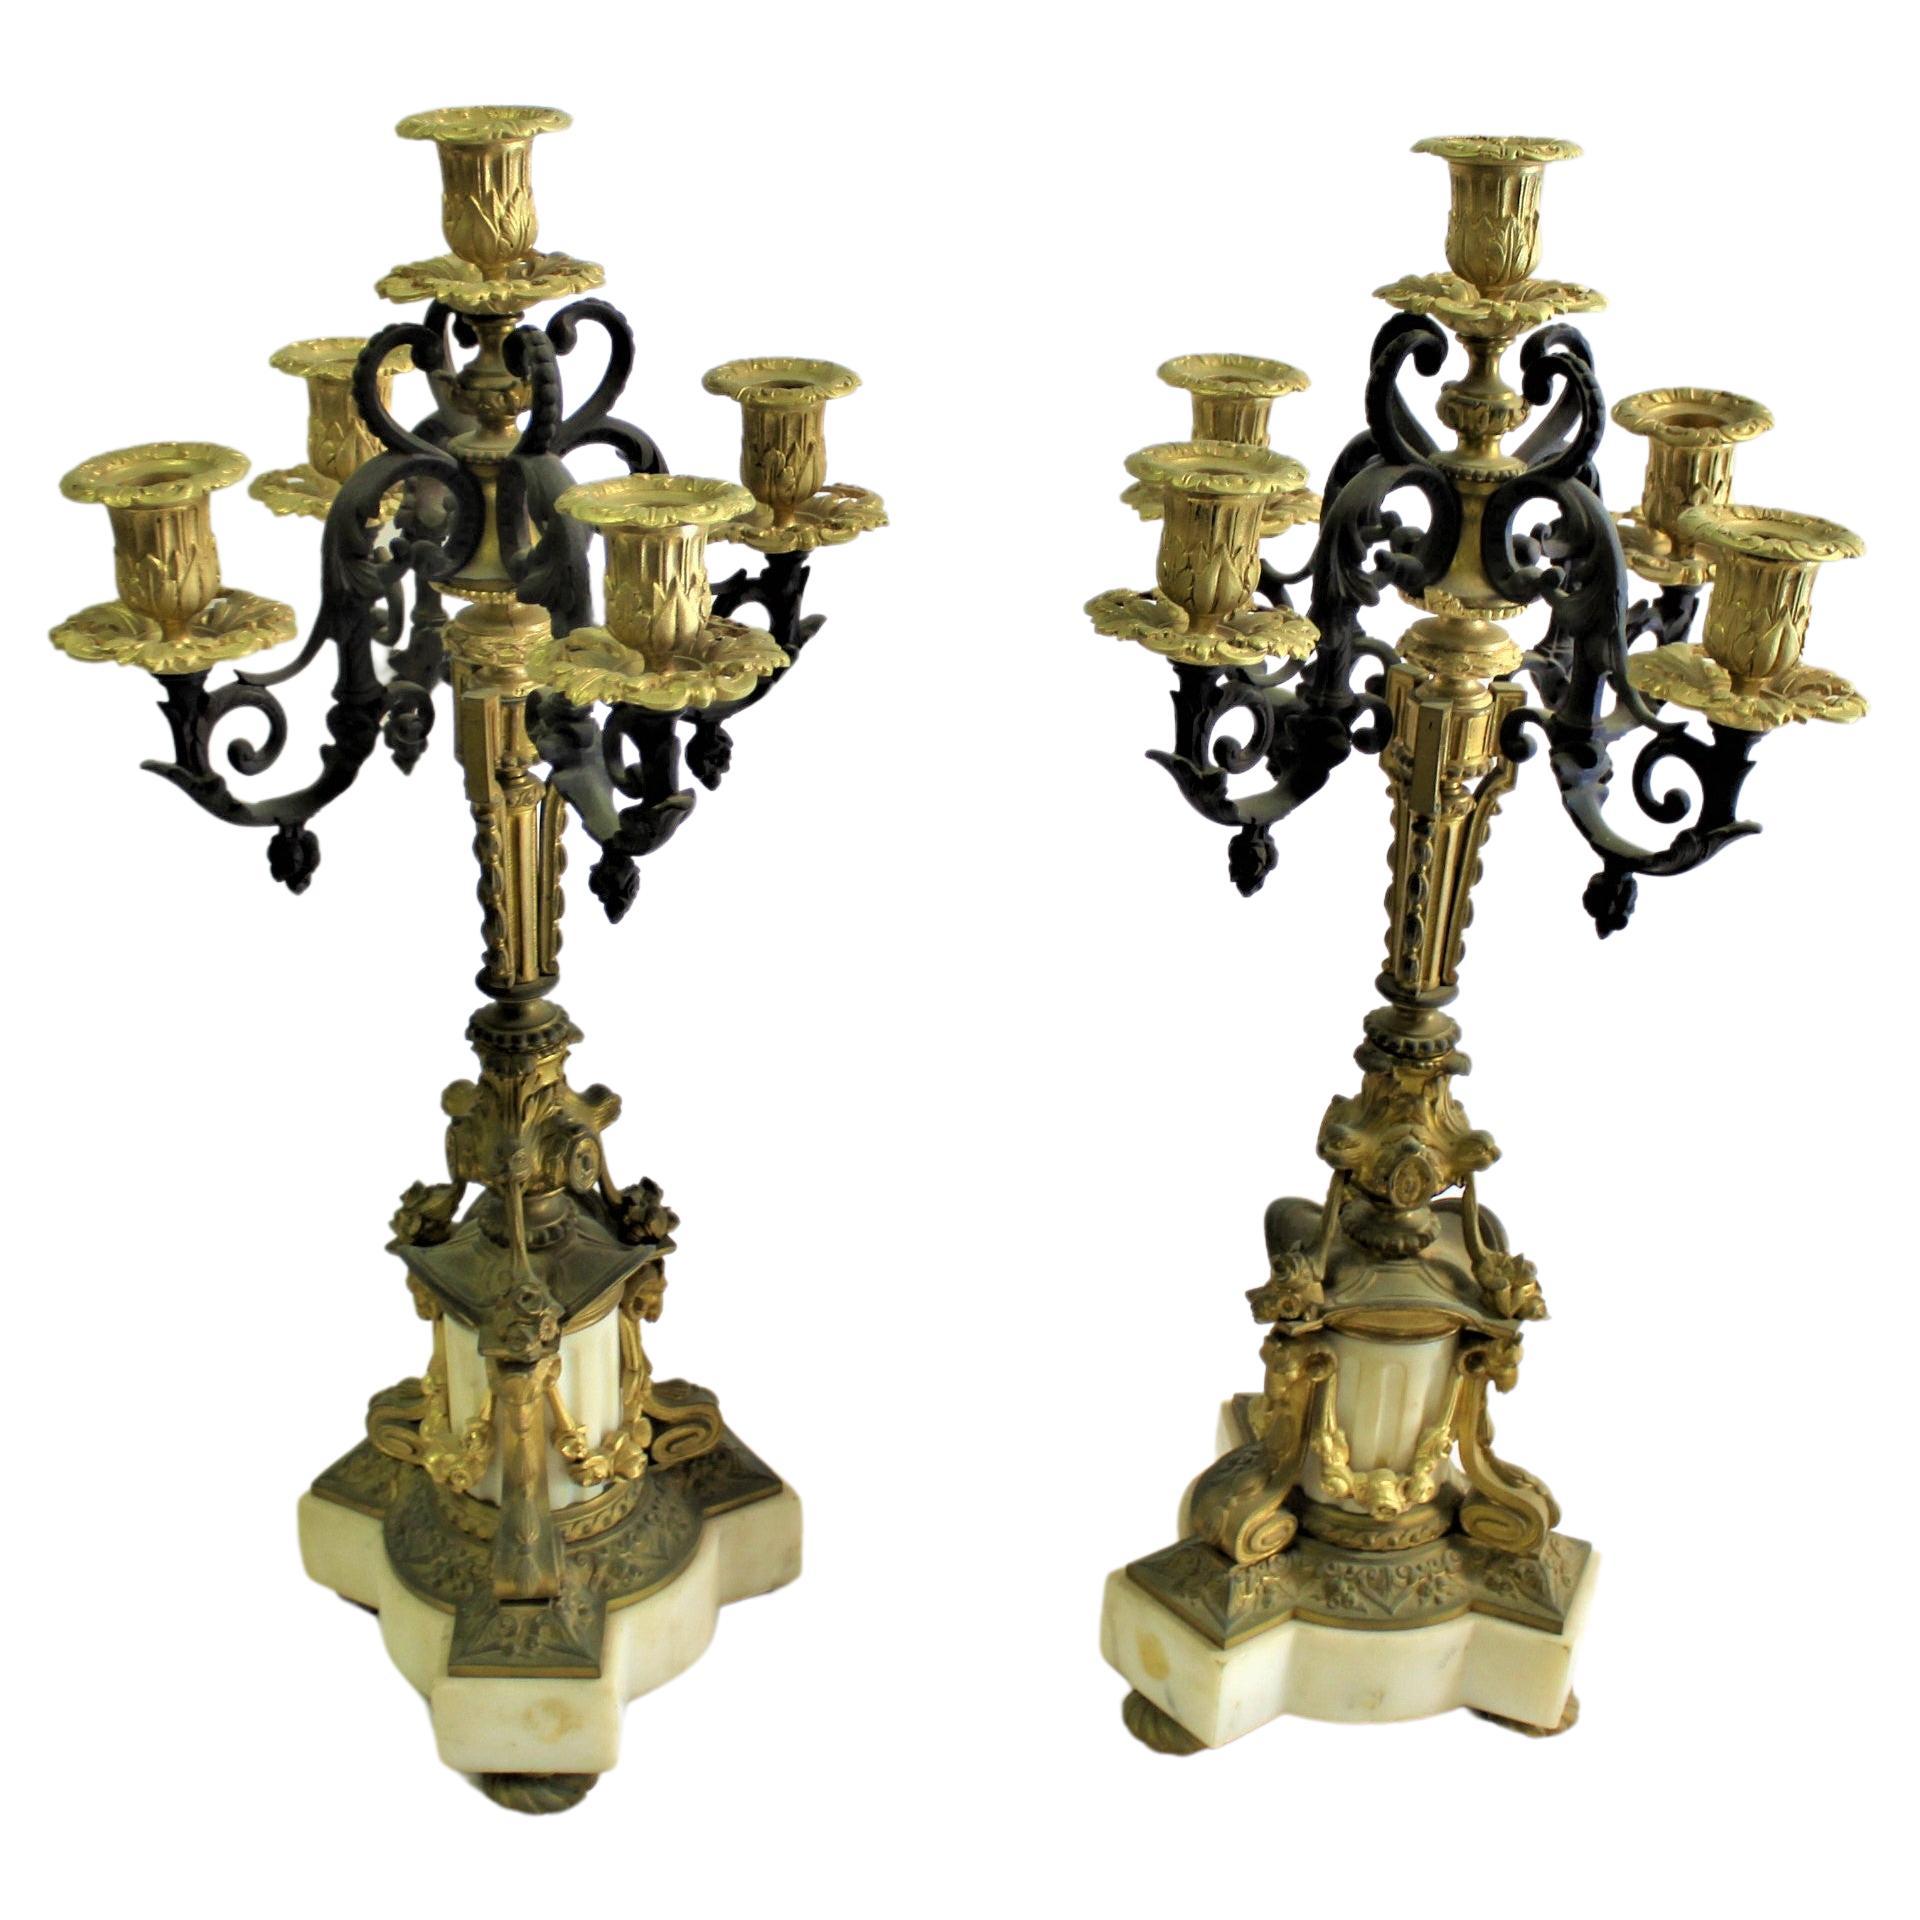 Candelabras, Antique Pair w/Dore' Gold Finish, 5 Arms